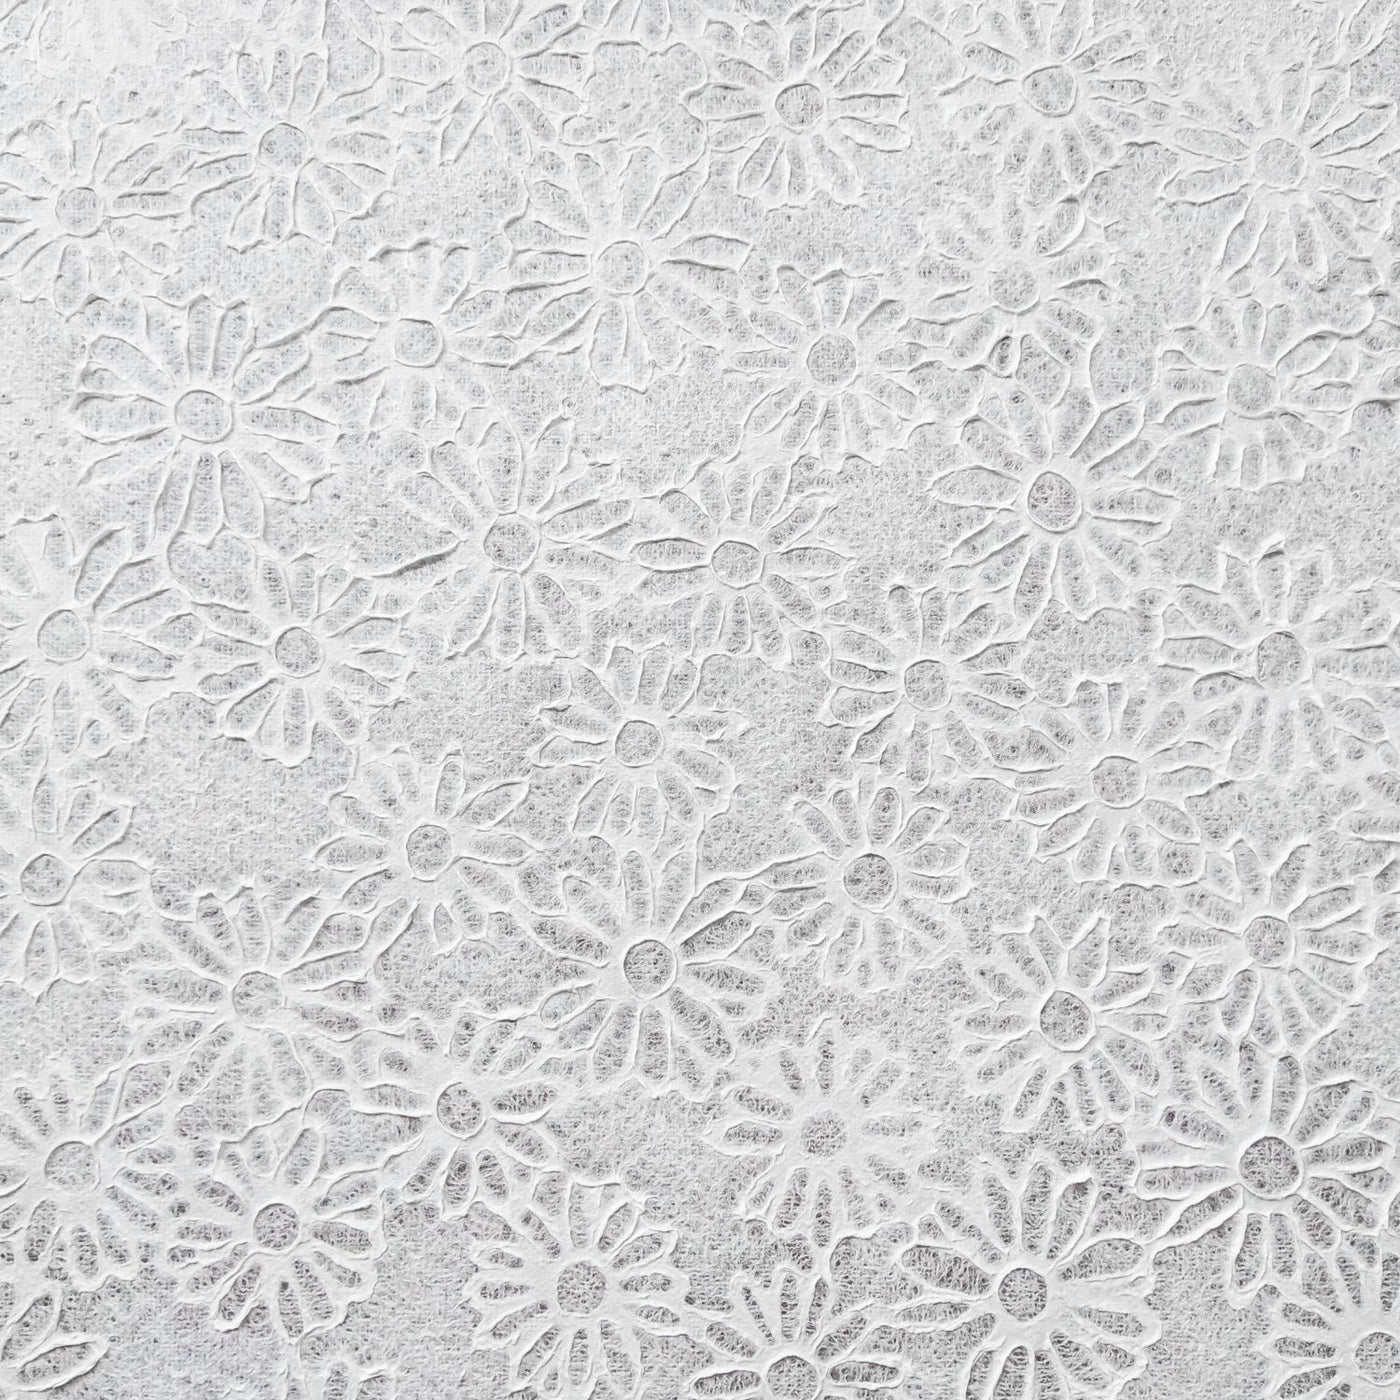 Handmade Embossed Lace Kozo Mulberry Paper (Daisy, White)